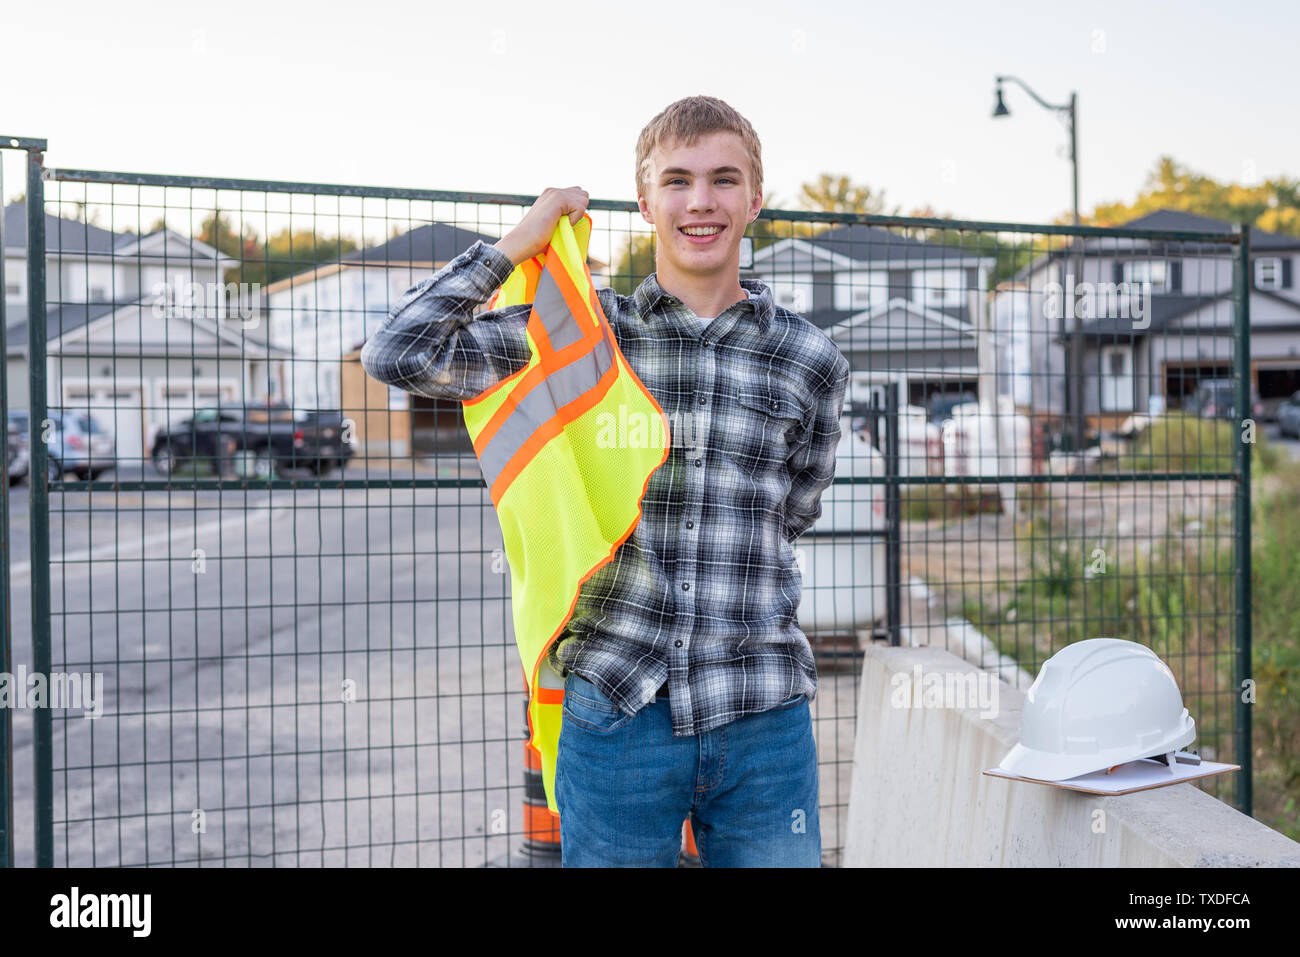 Young construction worker putting on his safety gear at a job site. Stock Photo